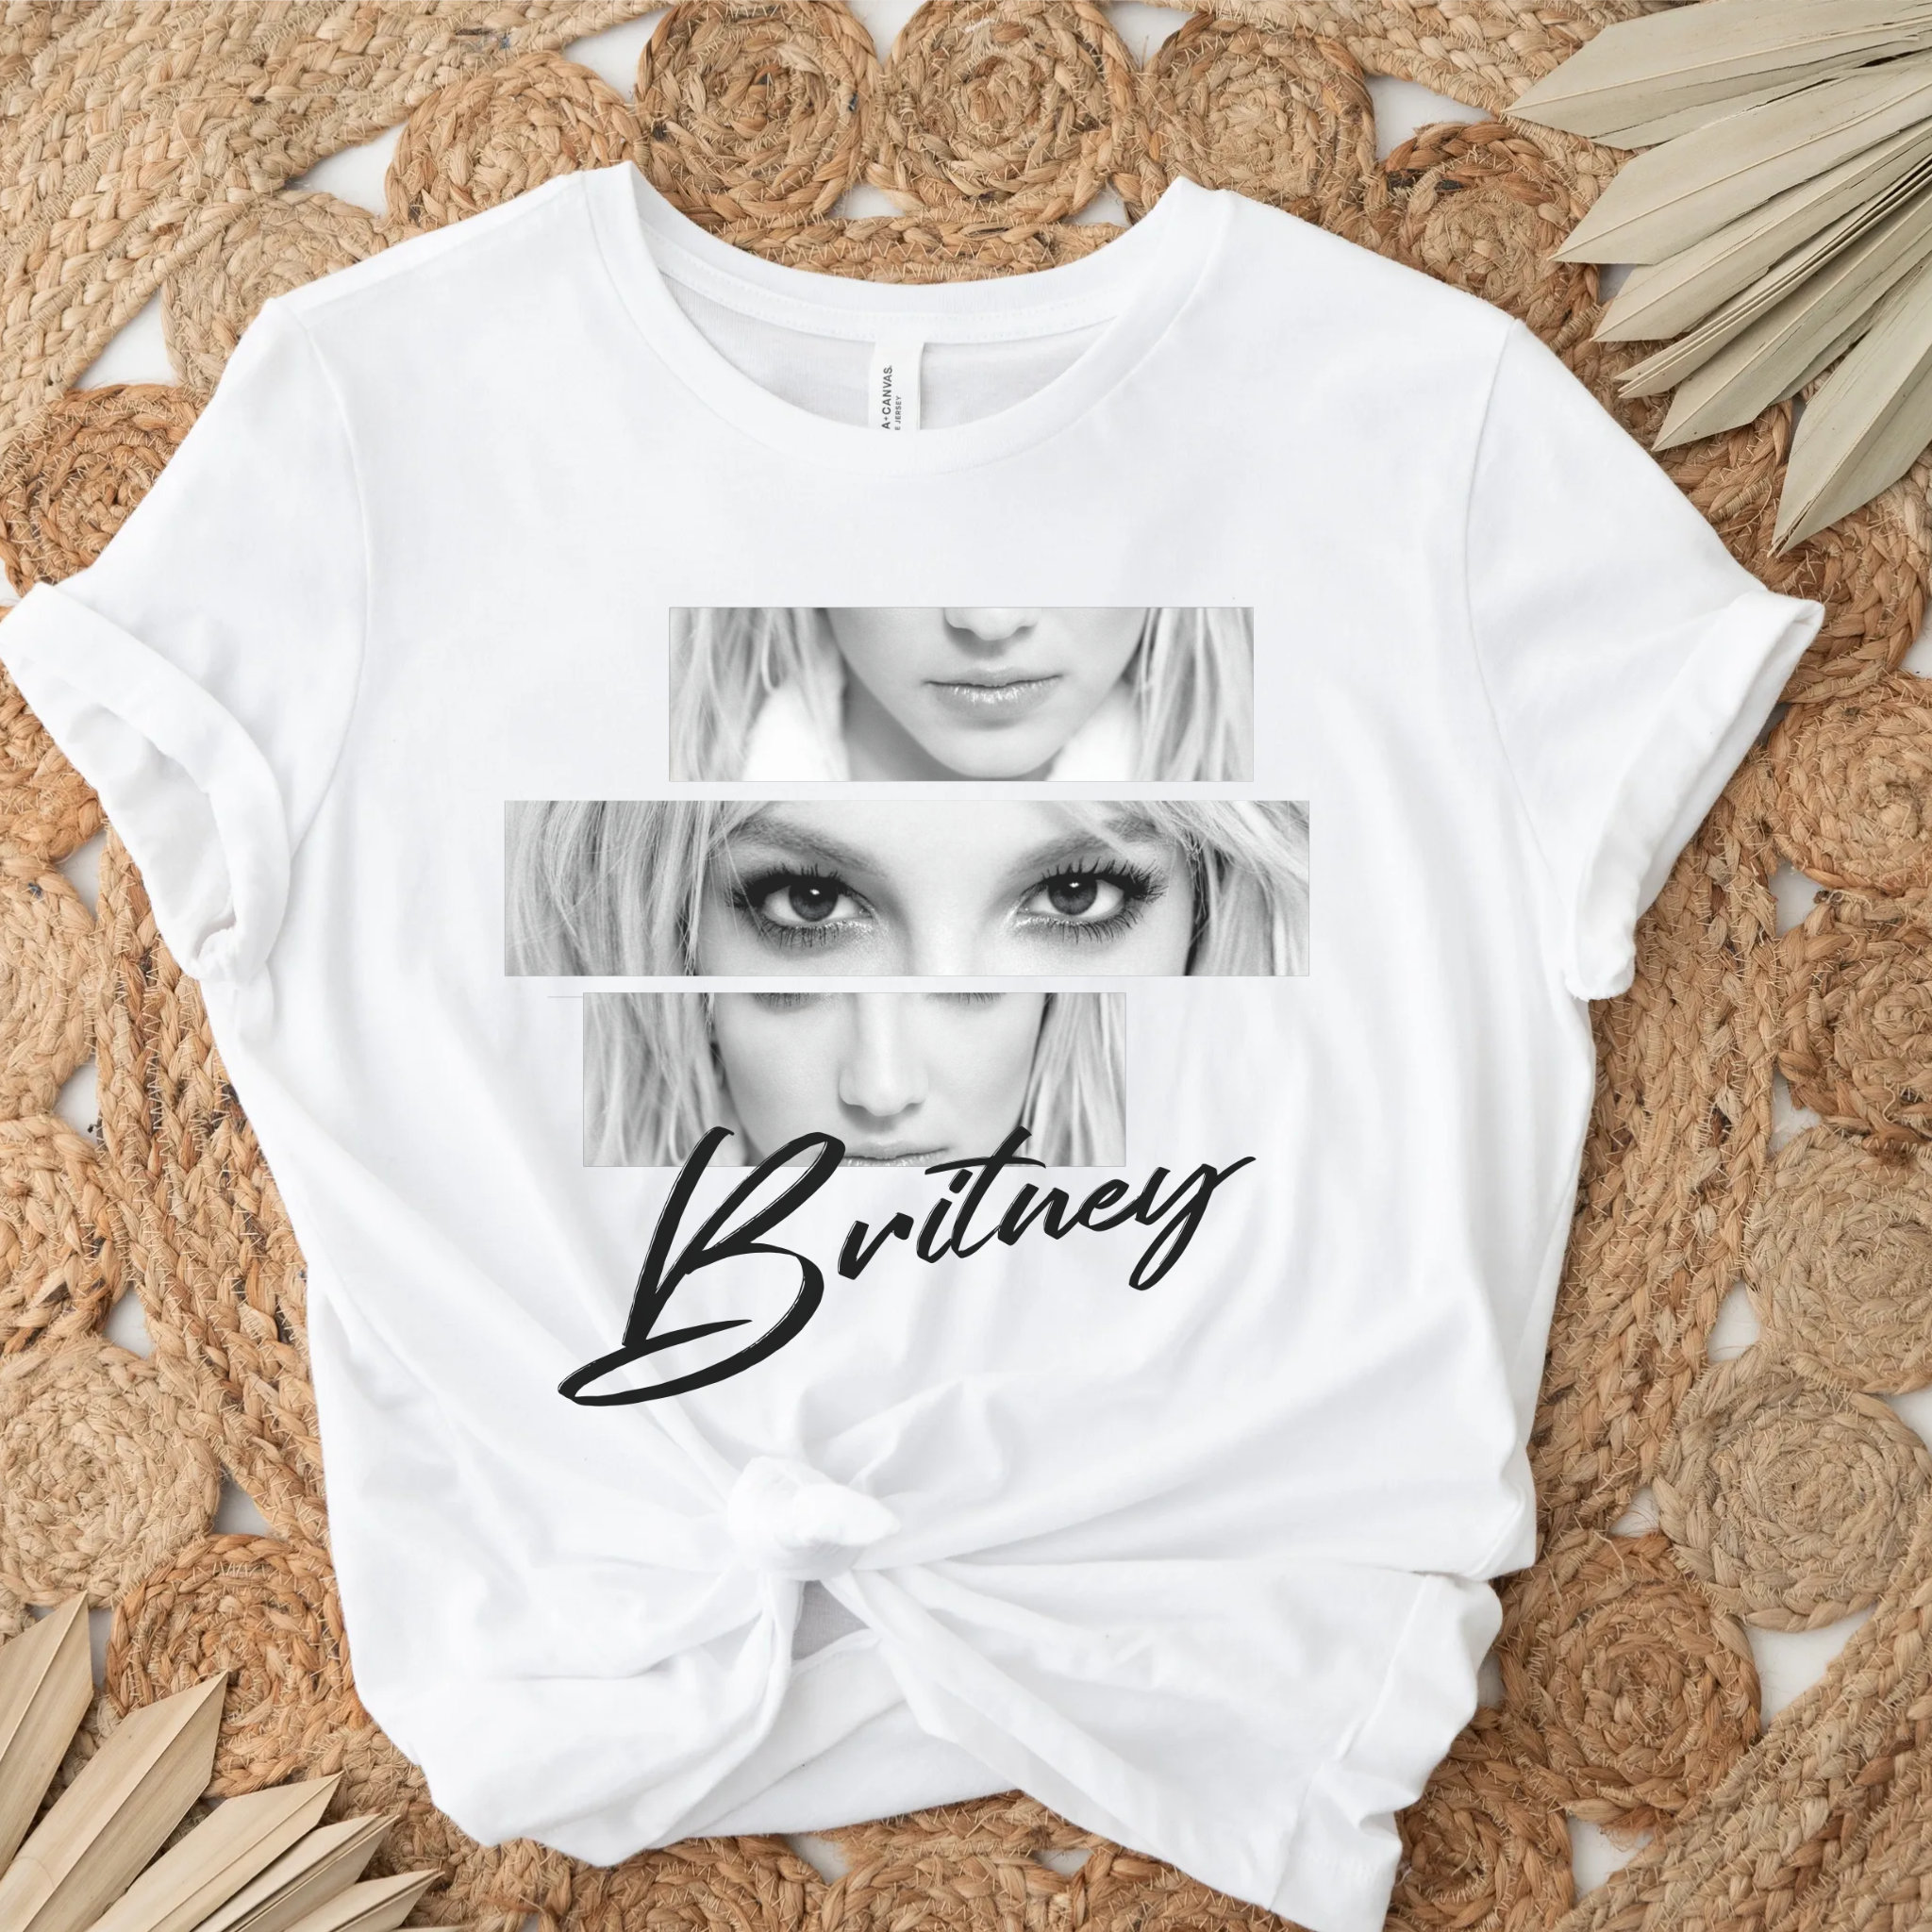 Discover Brit-ney Shirt, Britney Movement, Leave Britney Alone T-Shirt